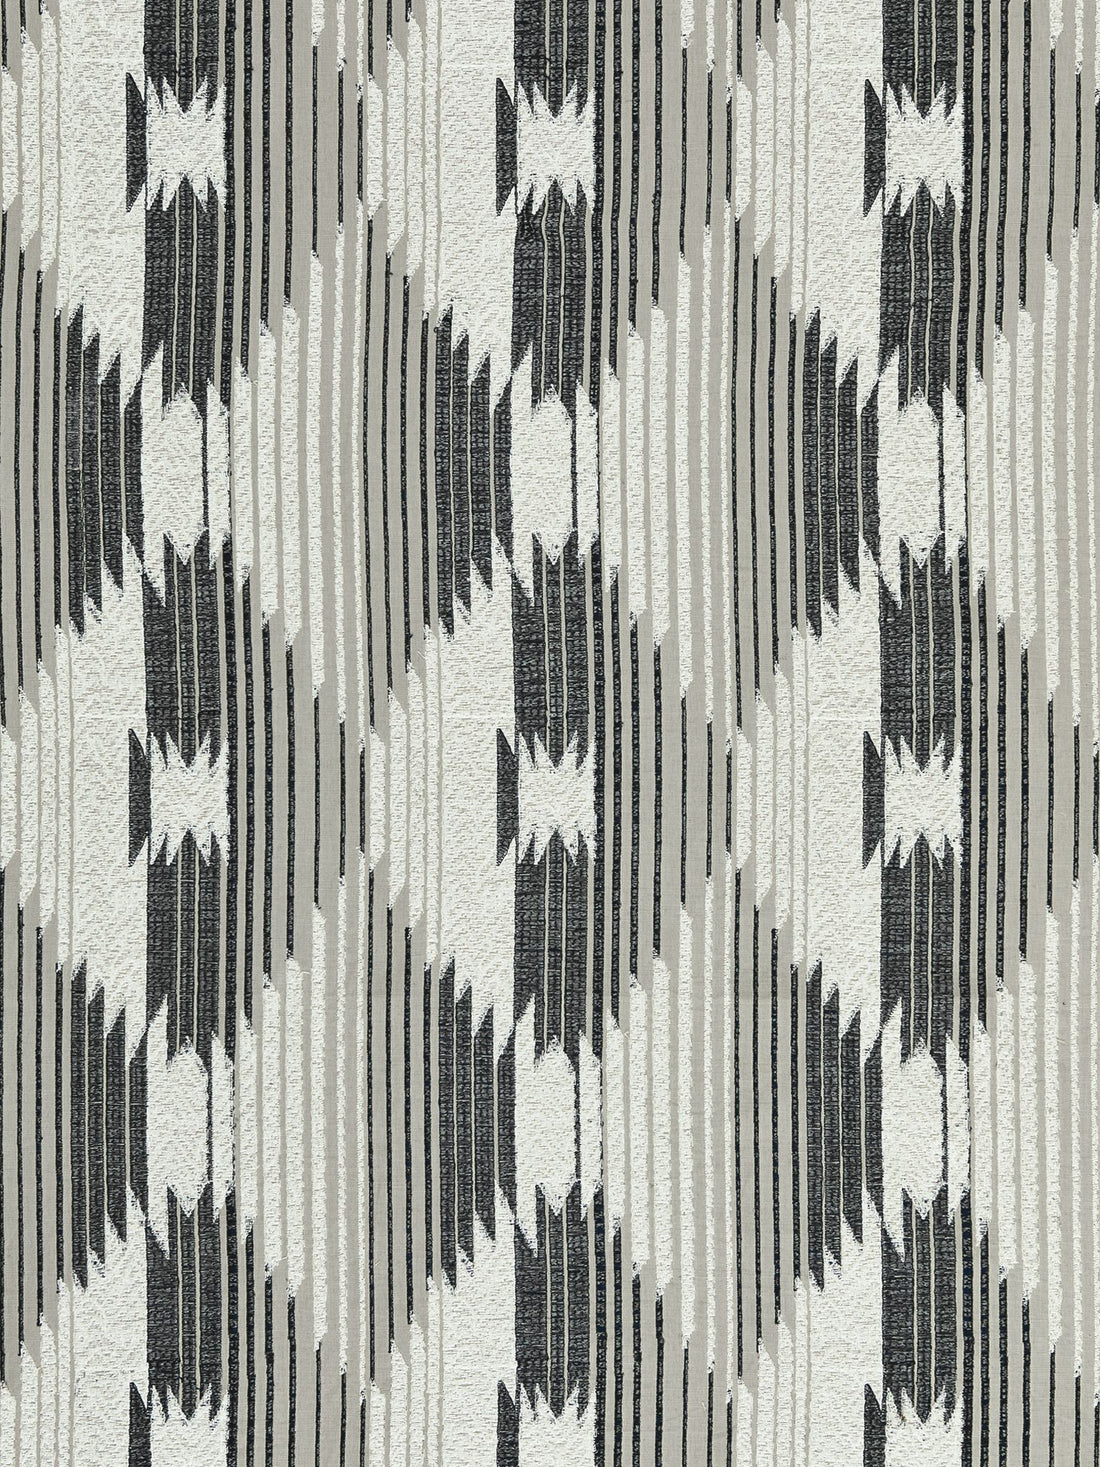 Tundar Blanket fabric in shadow color - pattern number S7 0002ATTC - by Scalamandre in the Old World Weavers collection